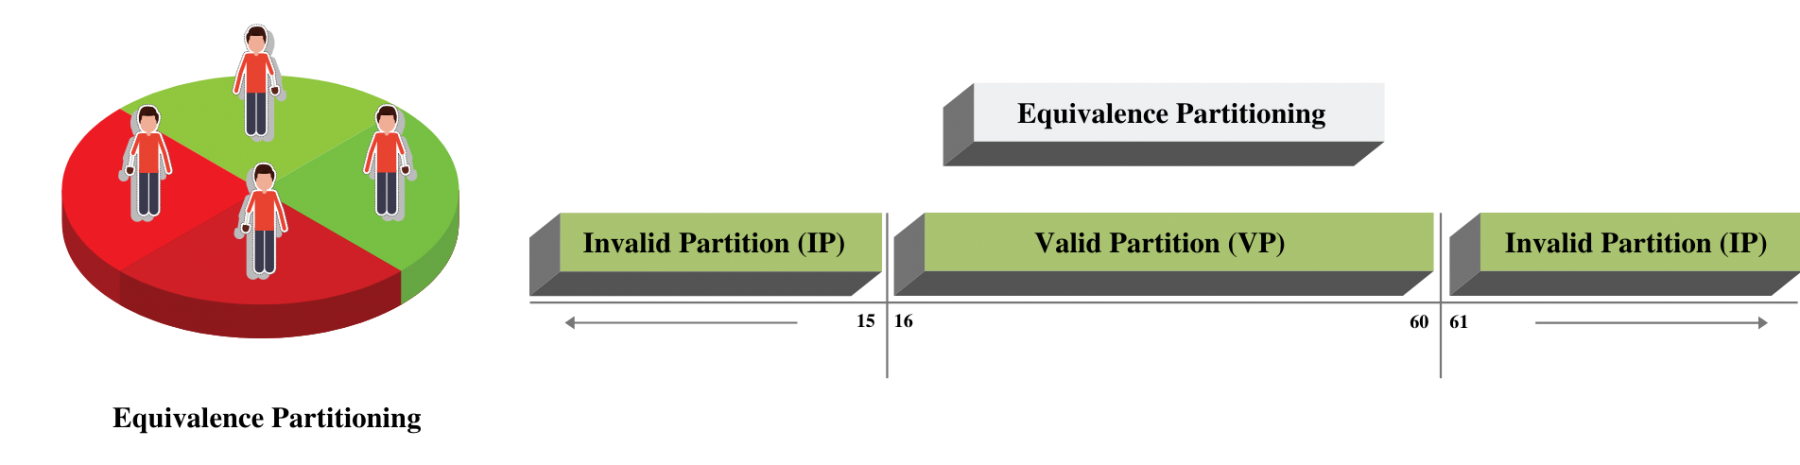 Equivalence Partitioning